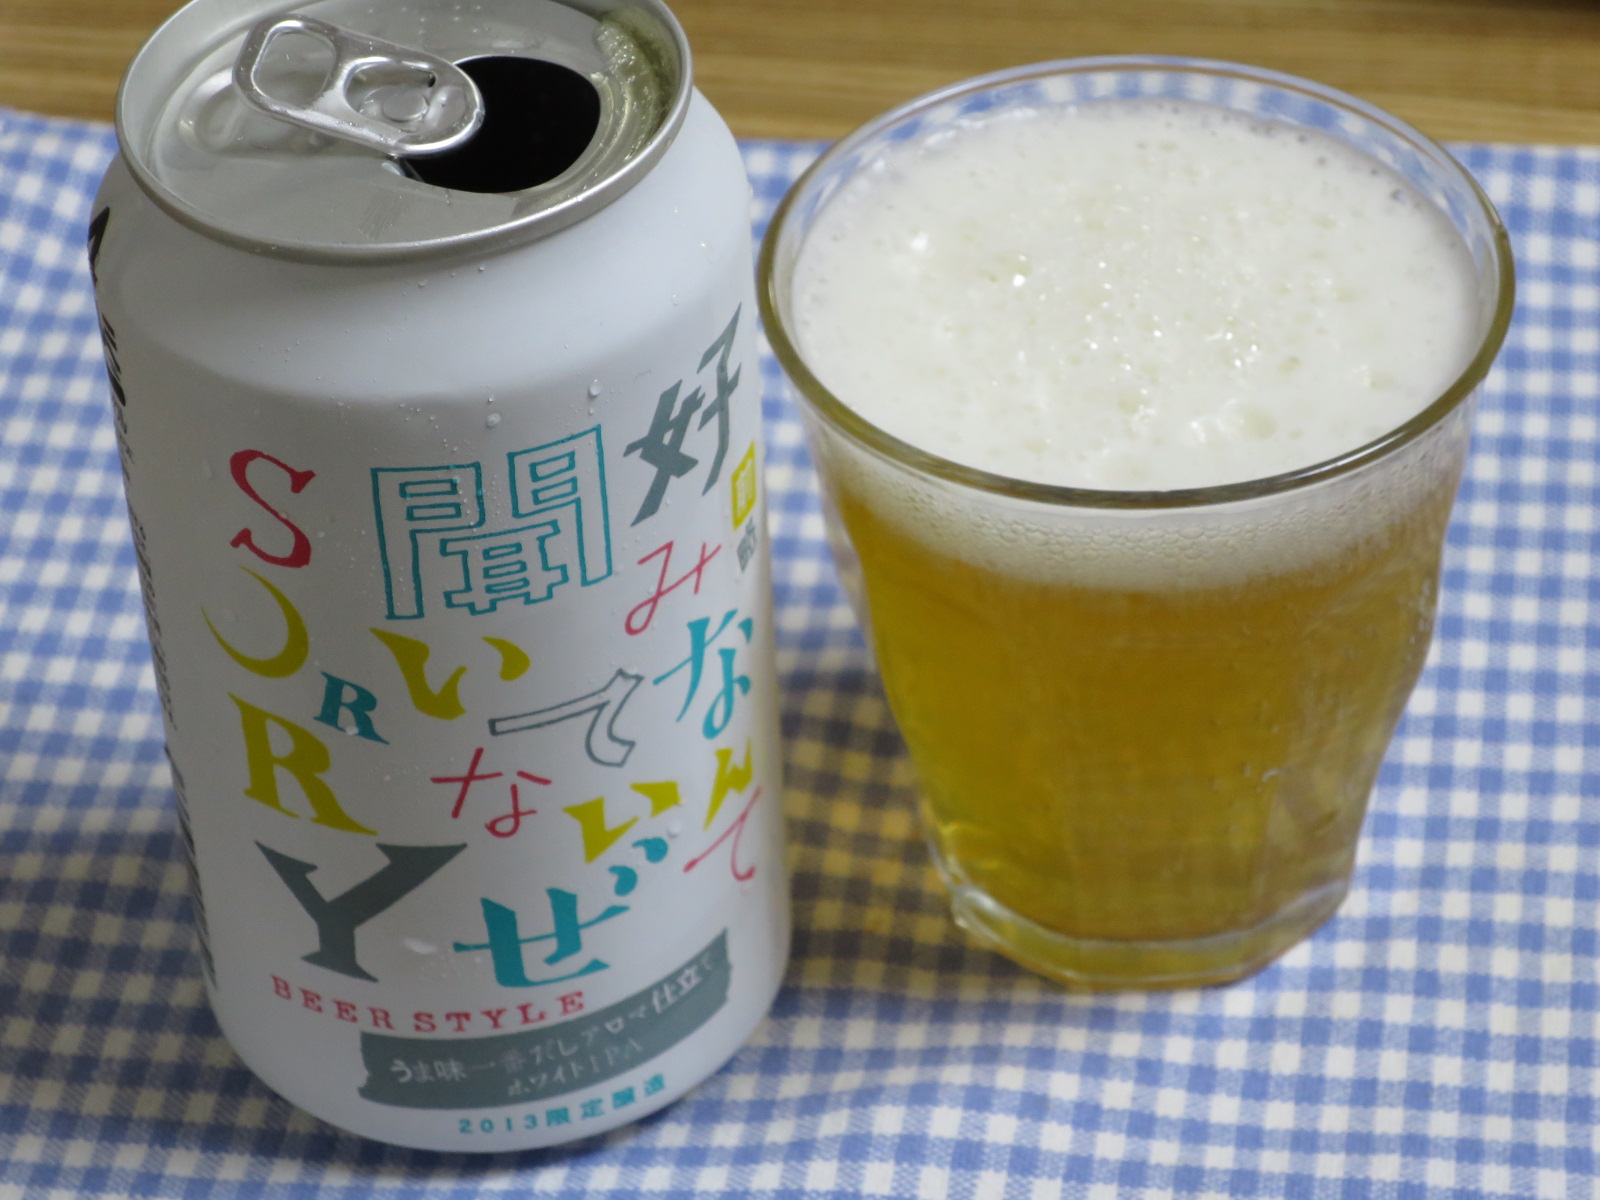 an empty can and a glass of beer sit on a checkered cloth